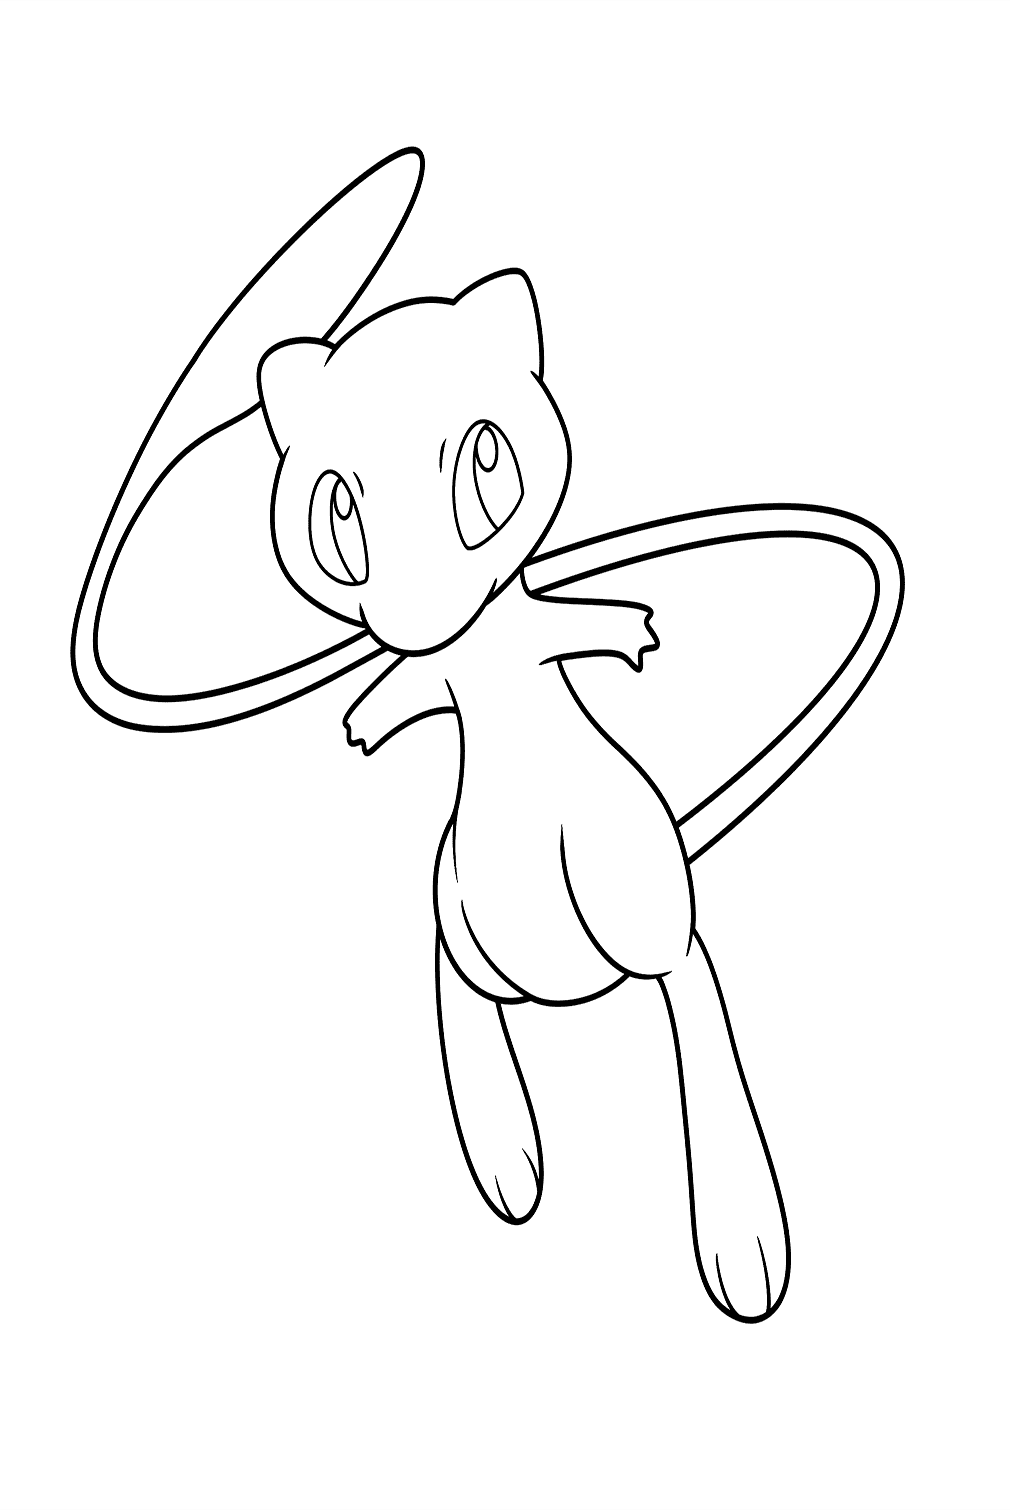 Mew Coloring Page For Preschool